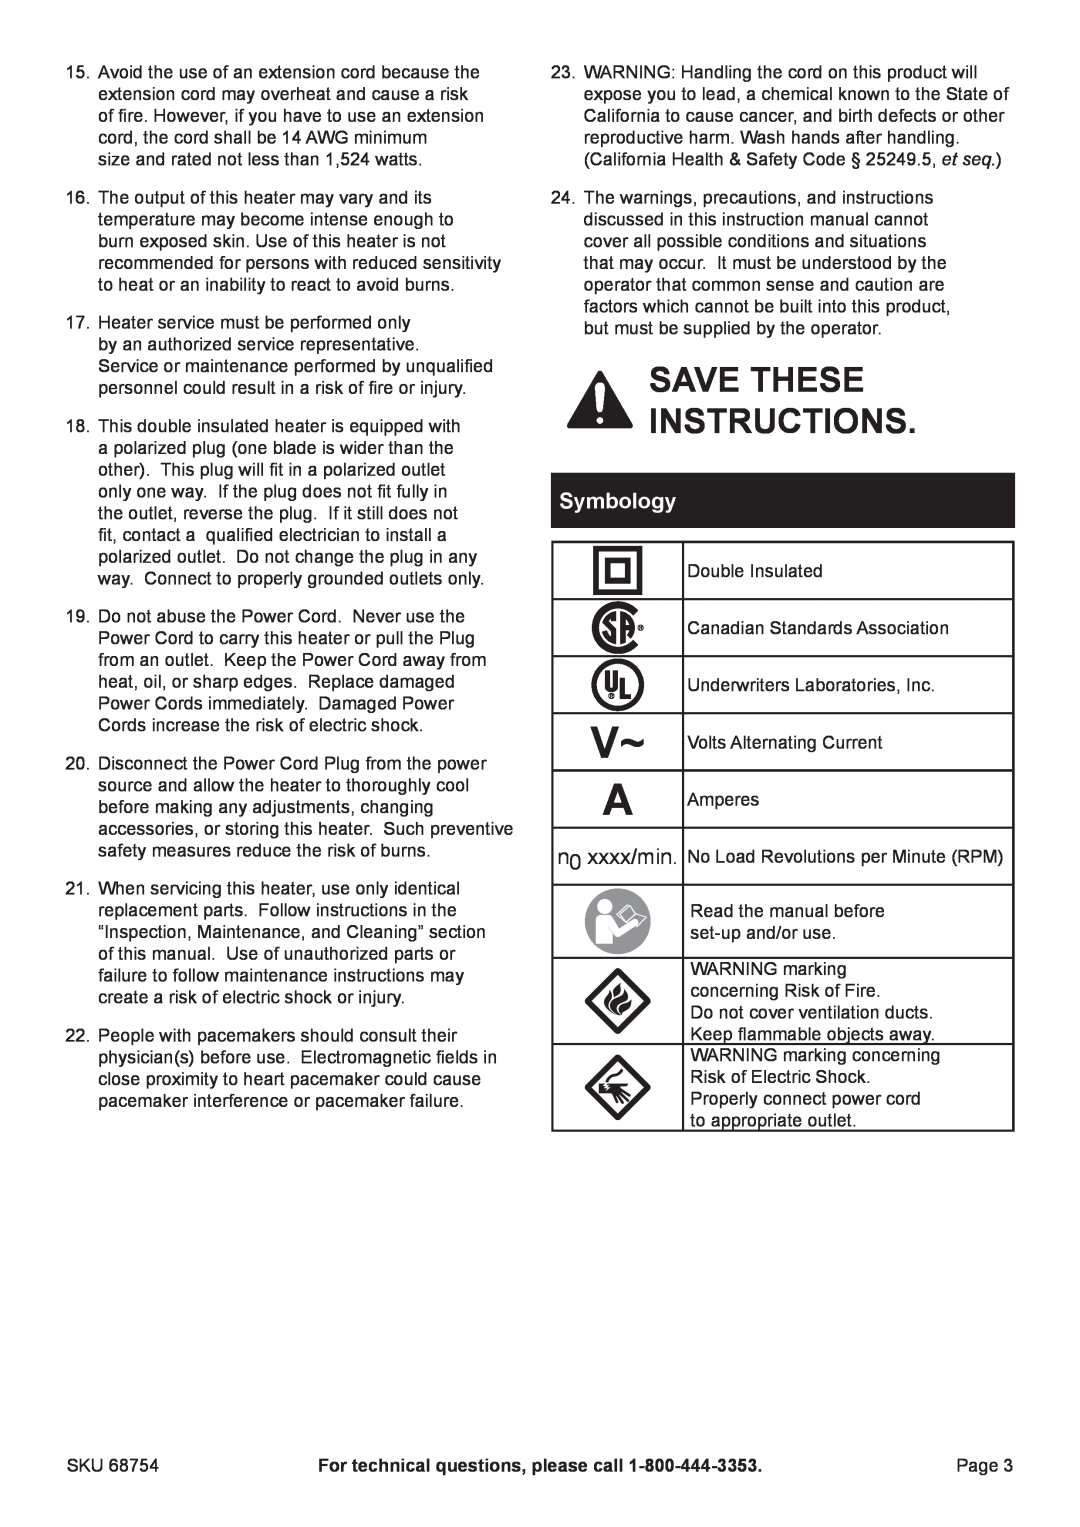 Harbor Freight Tools 68754 manual Symbology, Save These Instructions 